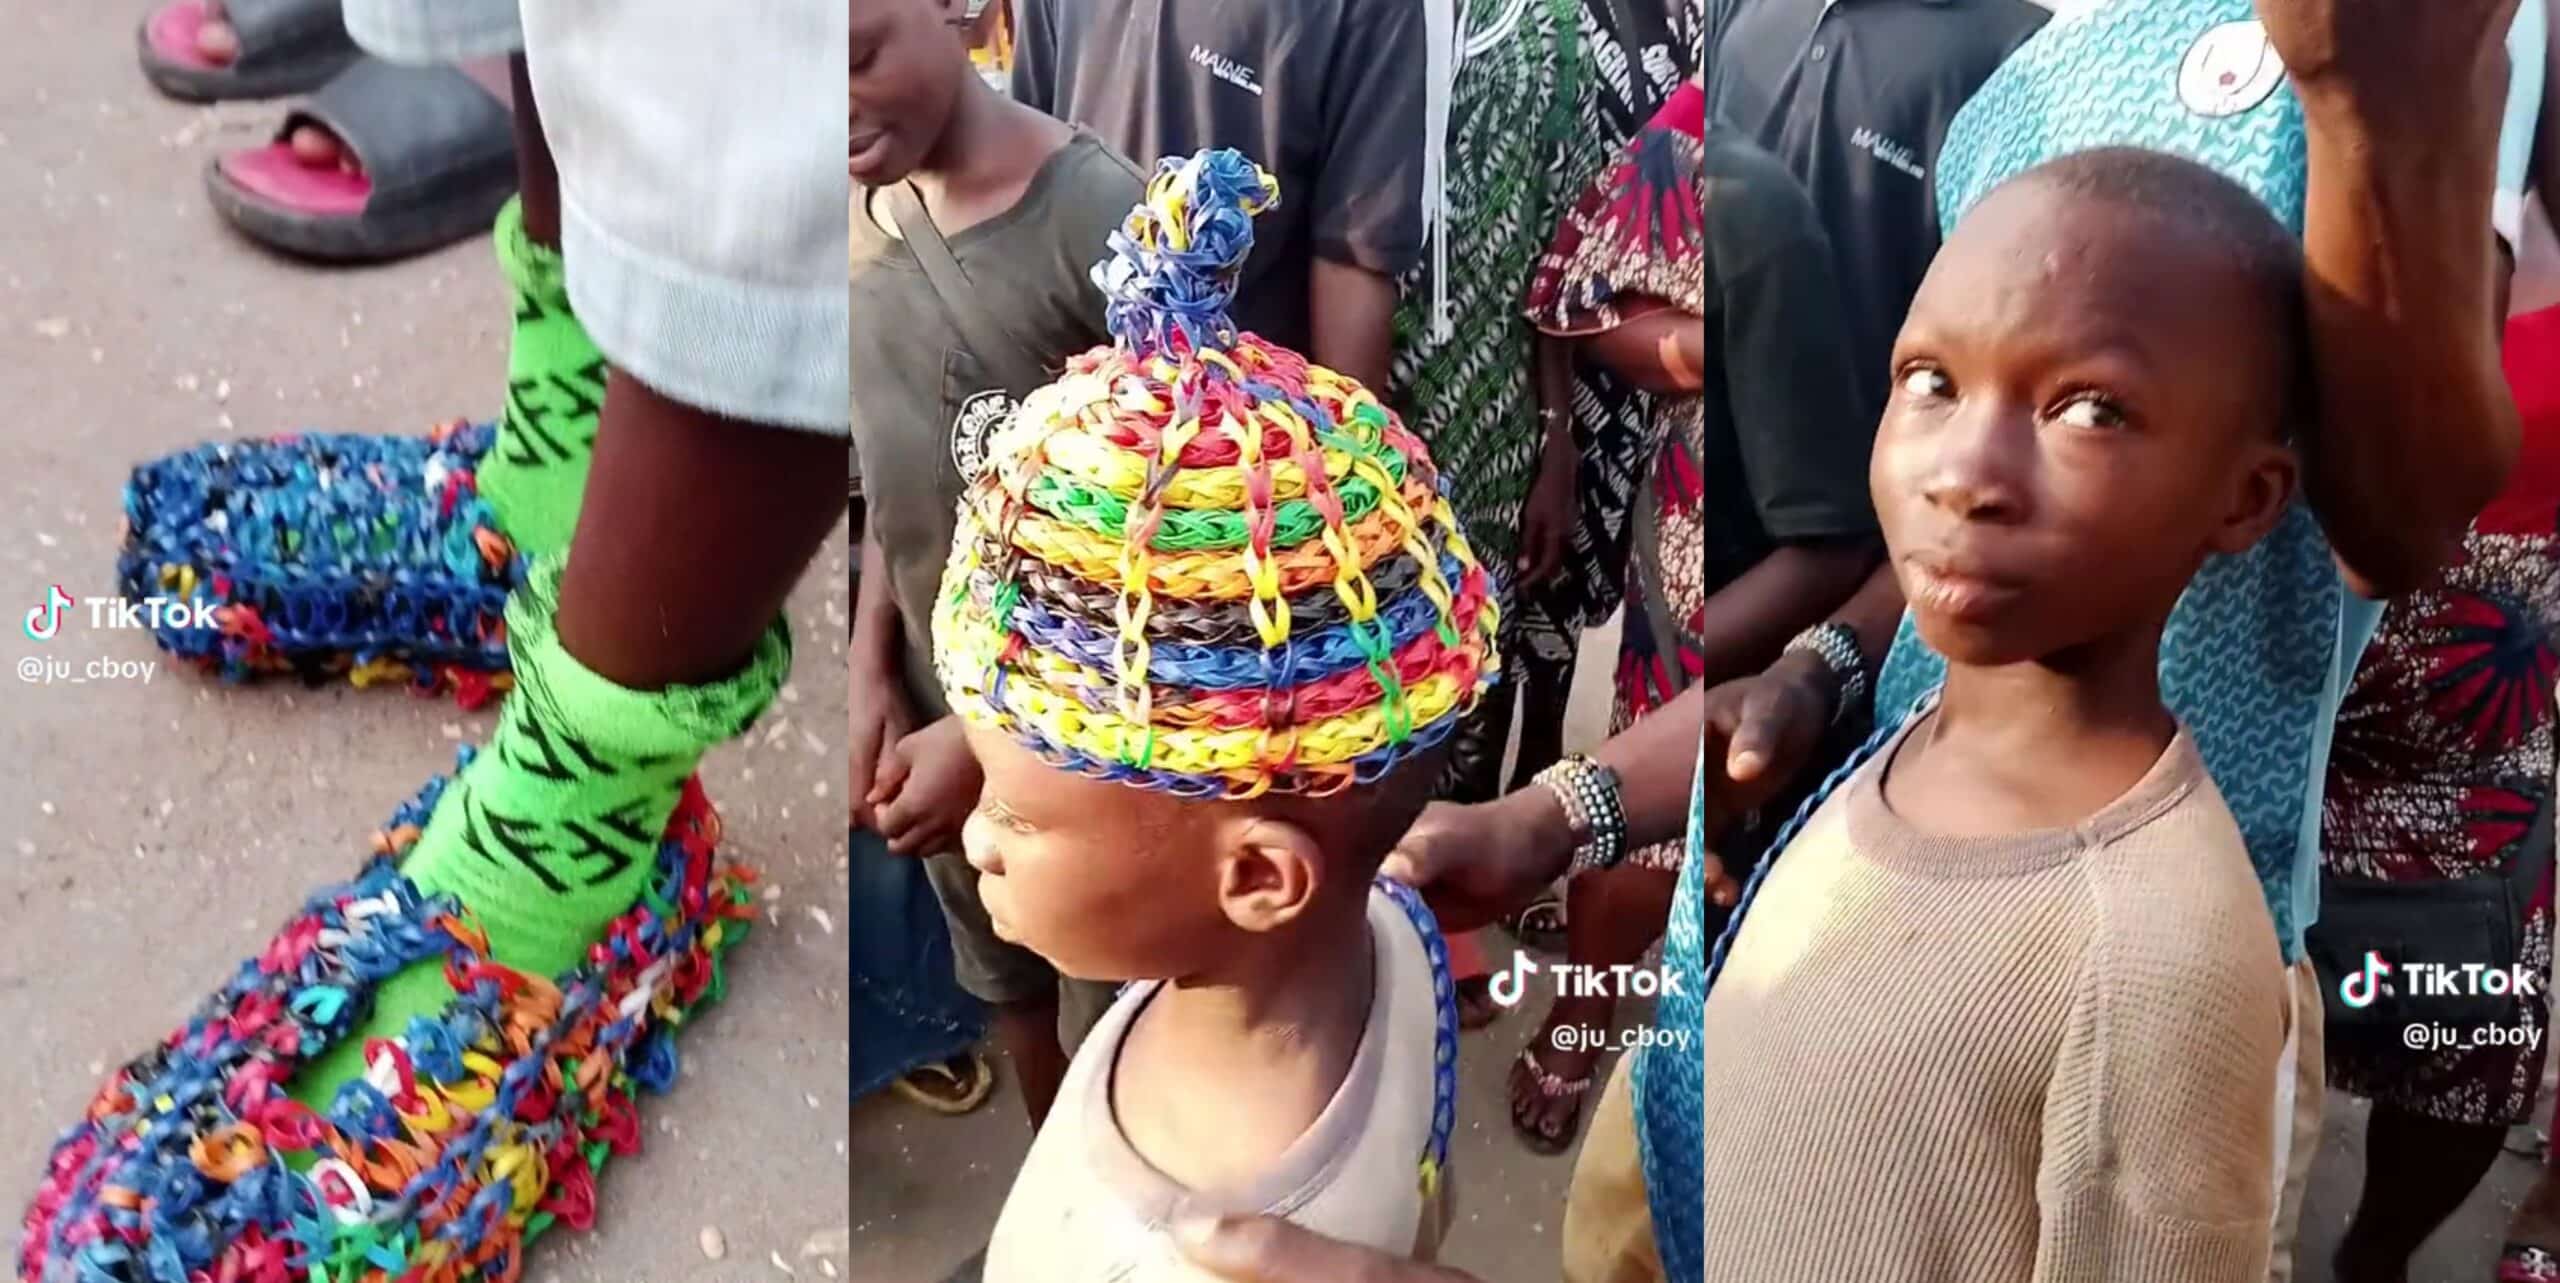 Talented young boy makes hat, shoes using only straws